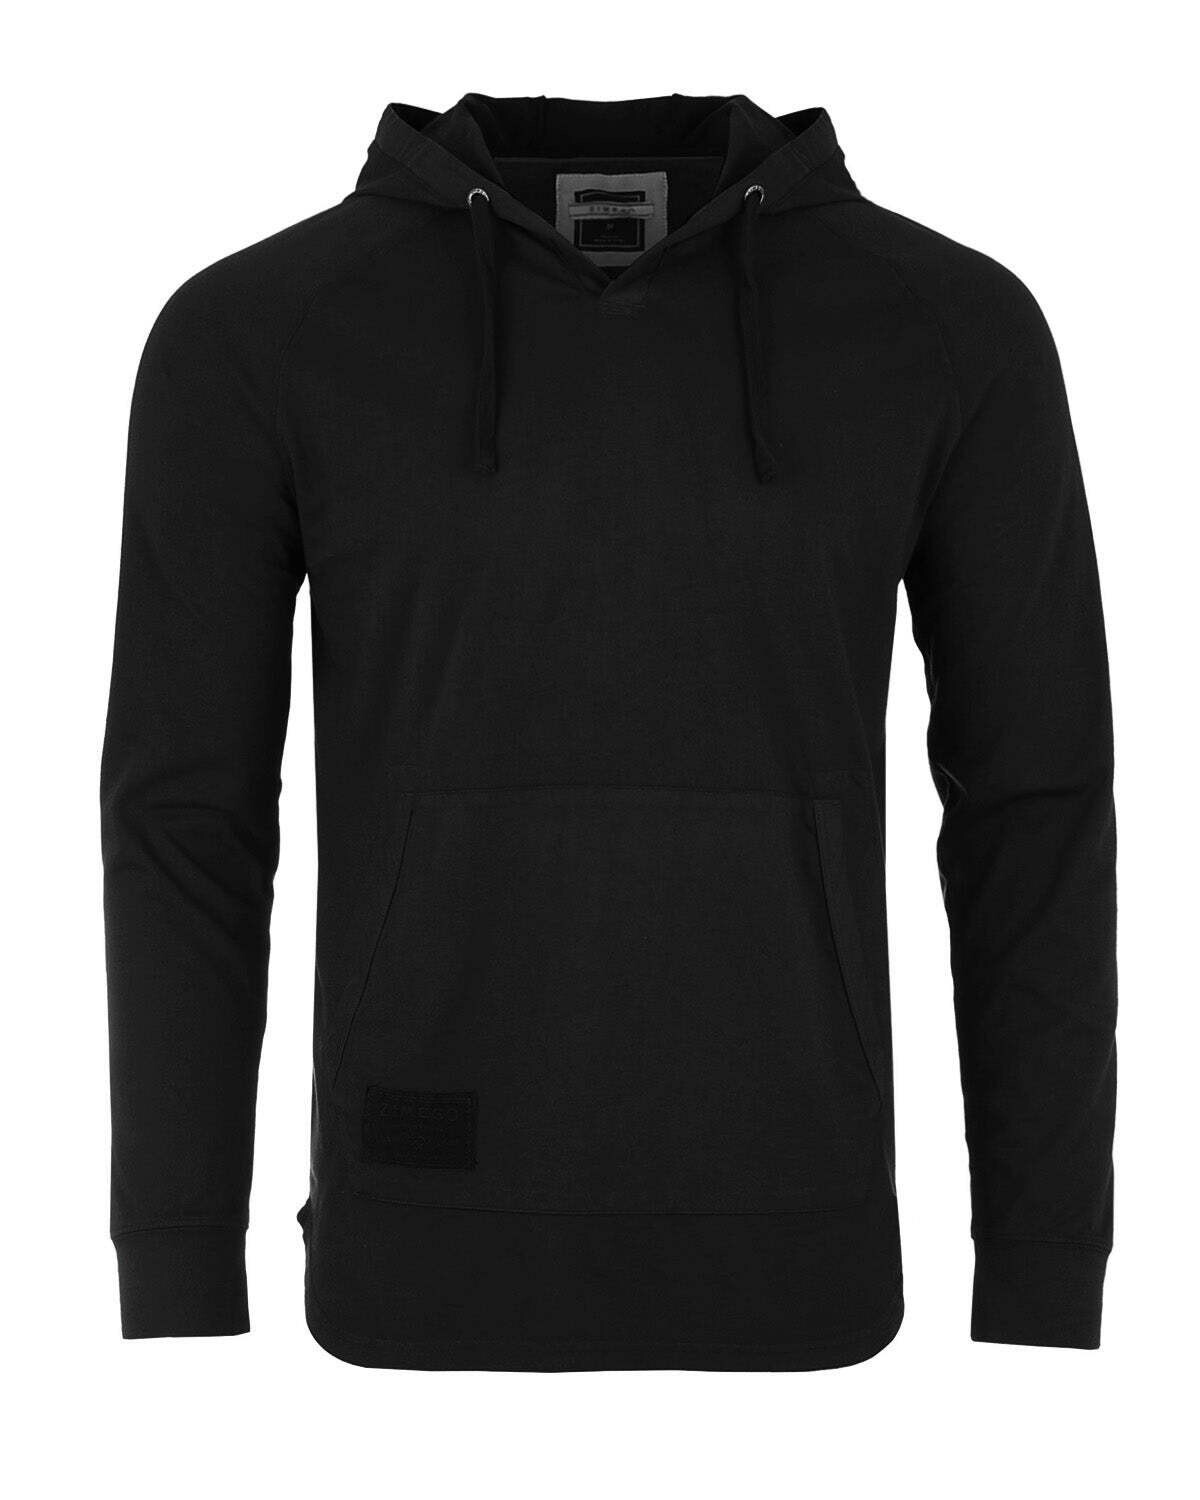 ZIMEGO Men's Pigment Dyed Hoodie - Athletic V Neck Long Sleeve Henley Pullover Shirt